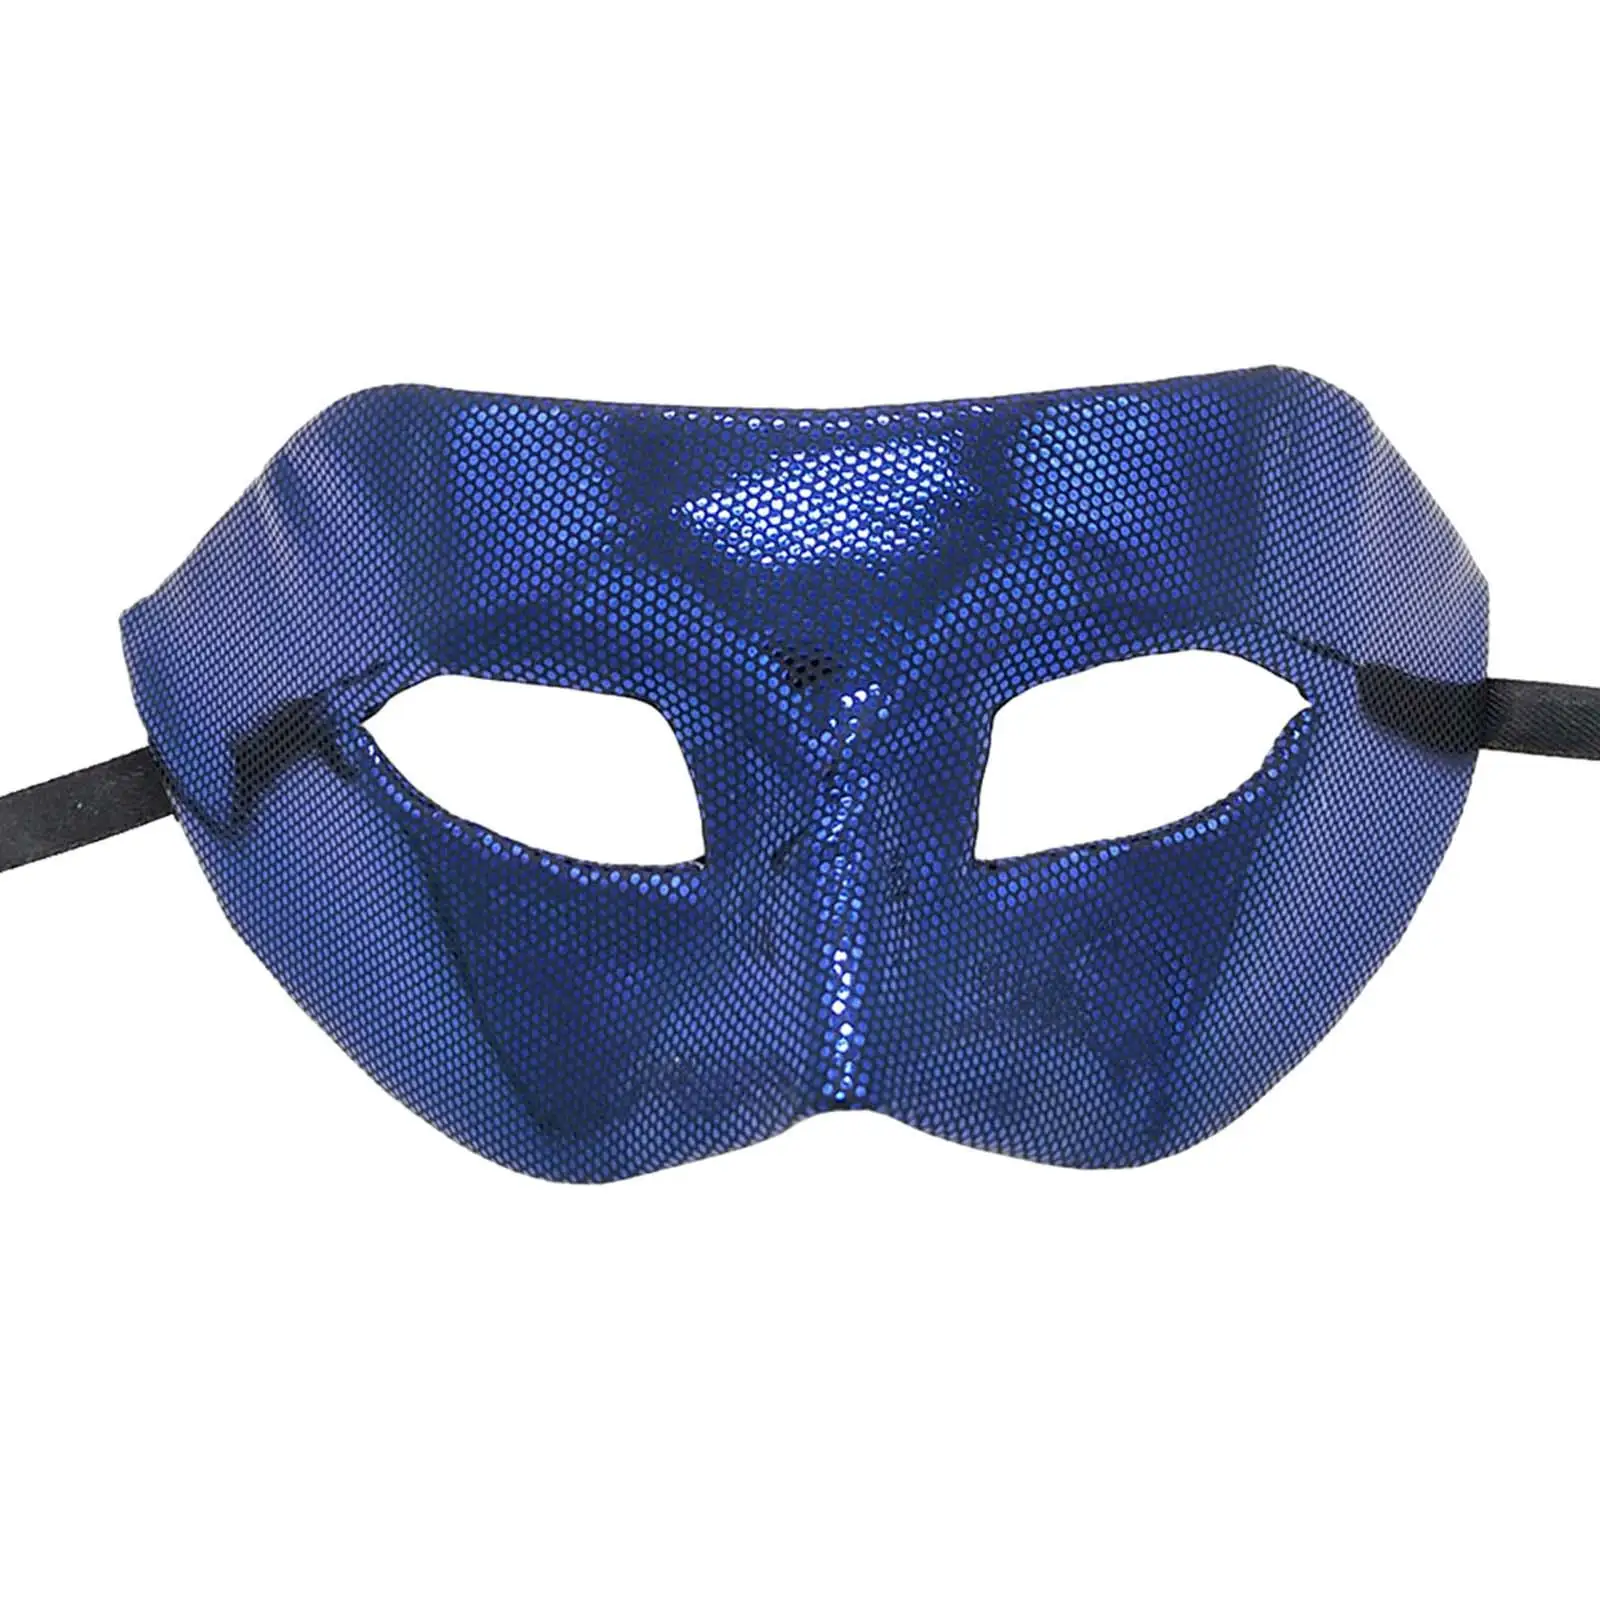 Masquerade Mask Decorative Half Face Mask for Holiday Dress up Halloween